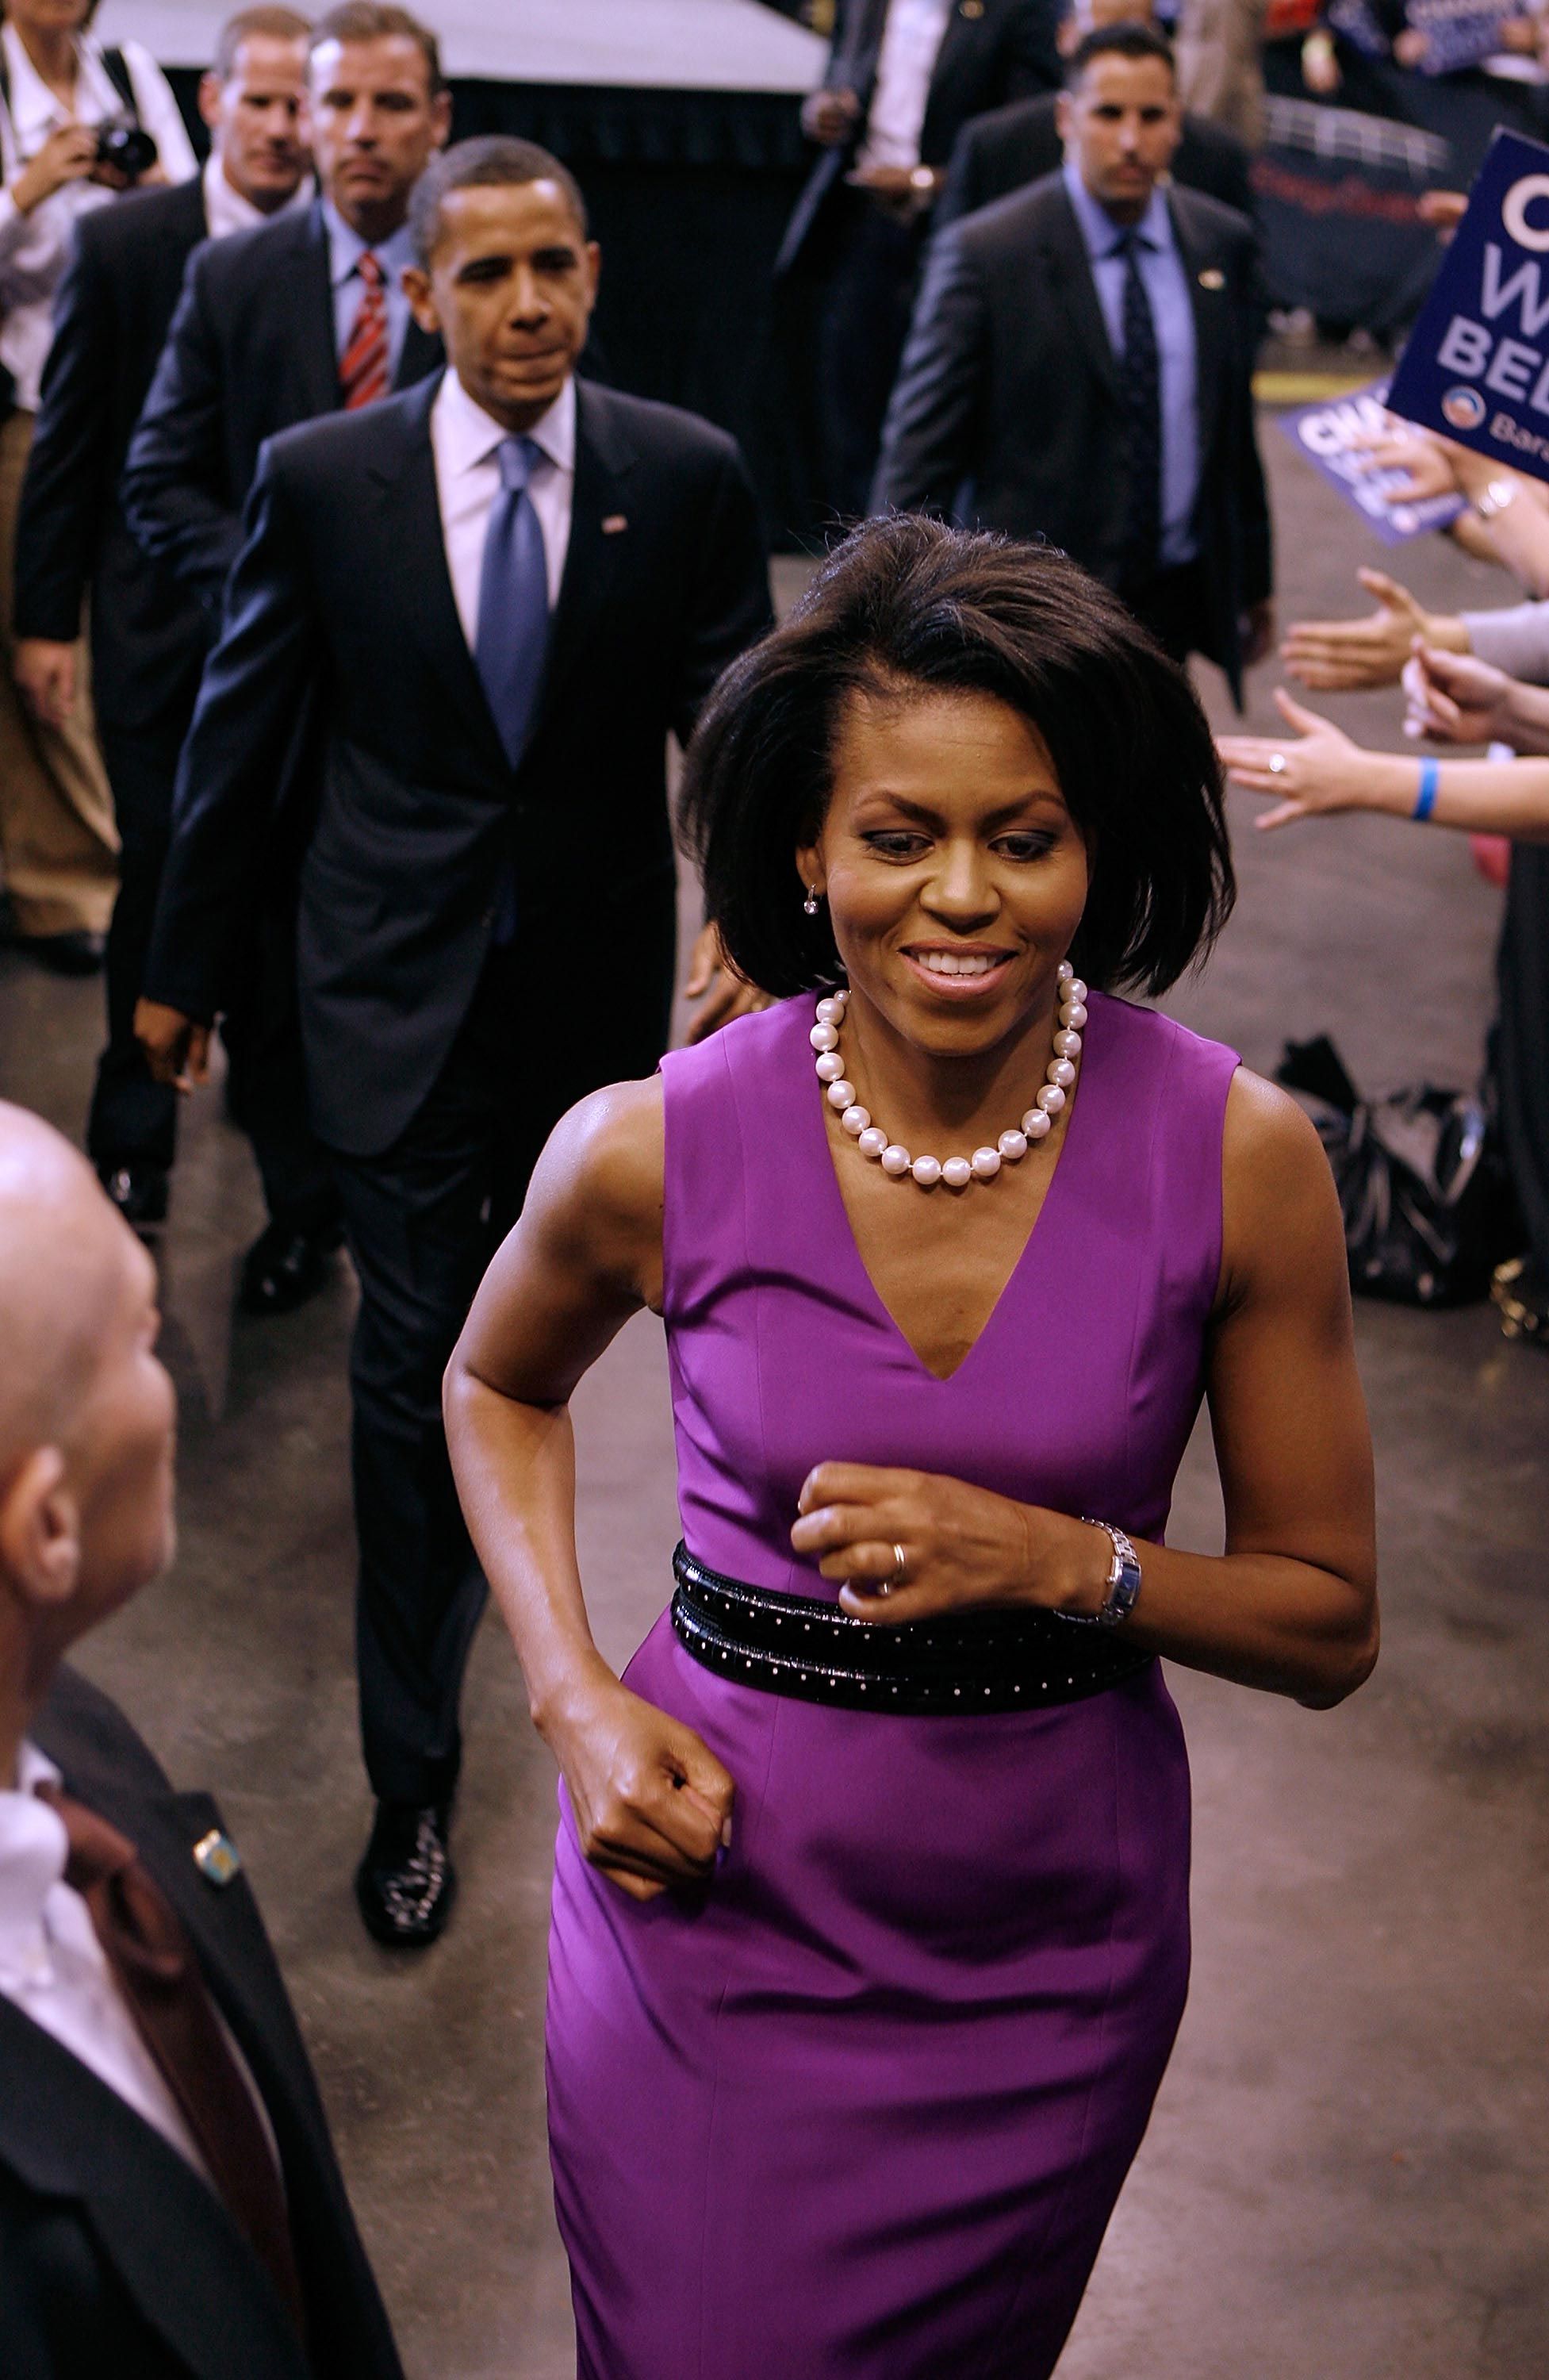 Michelle Obamas Best Style Moments image